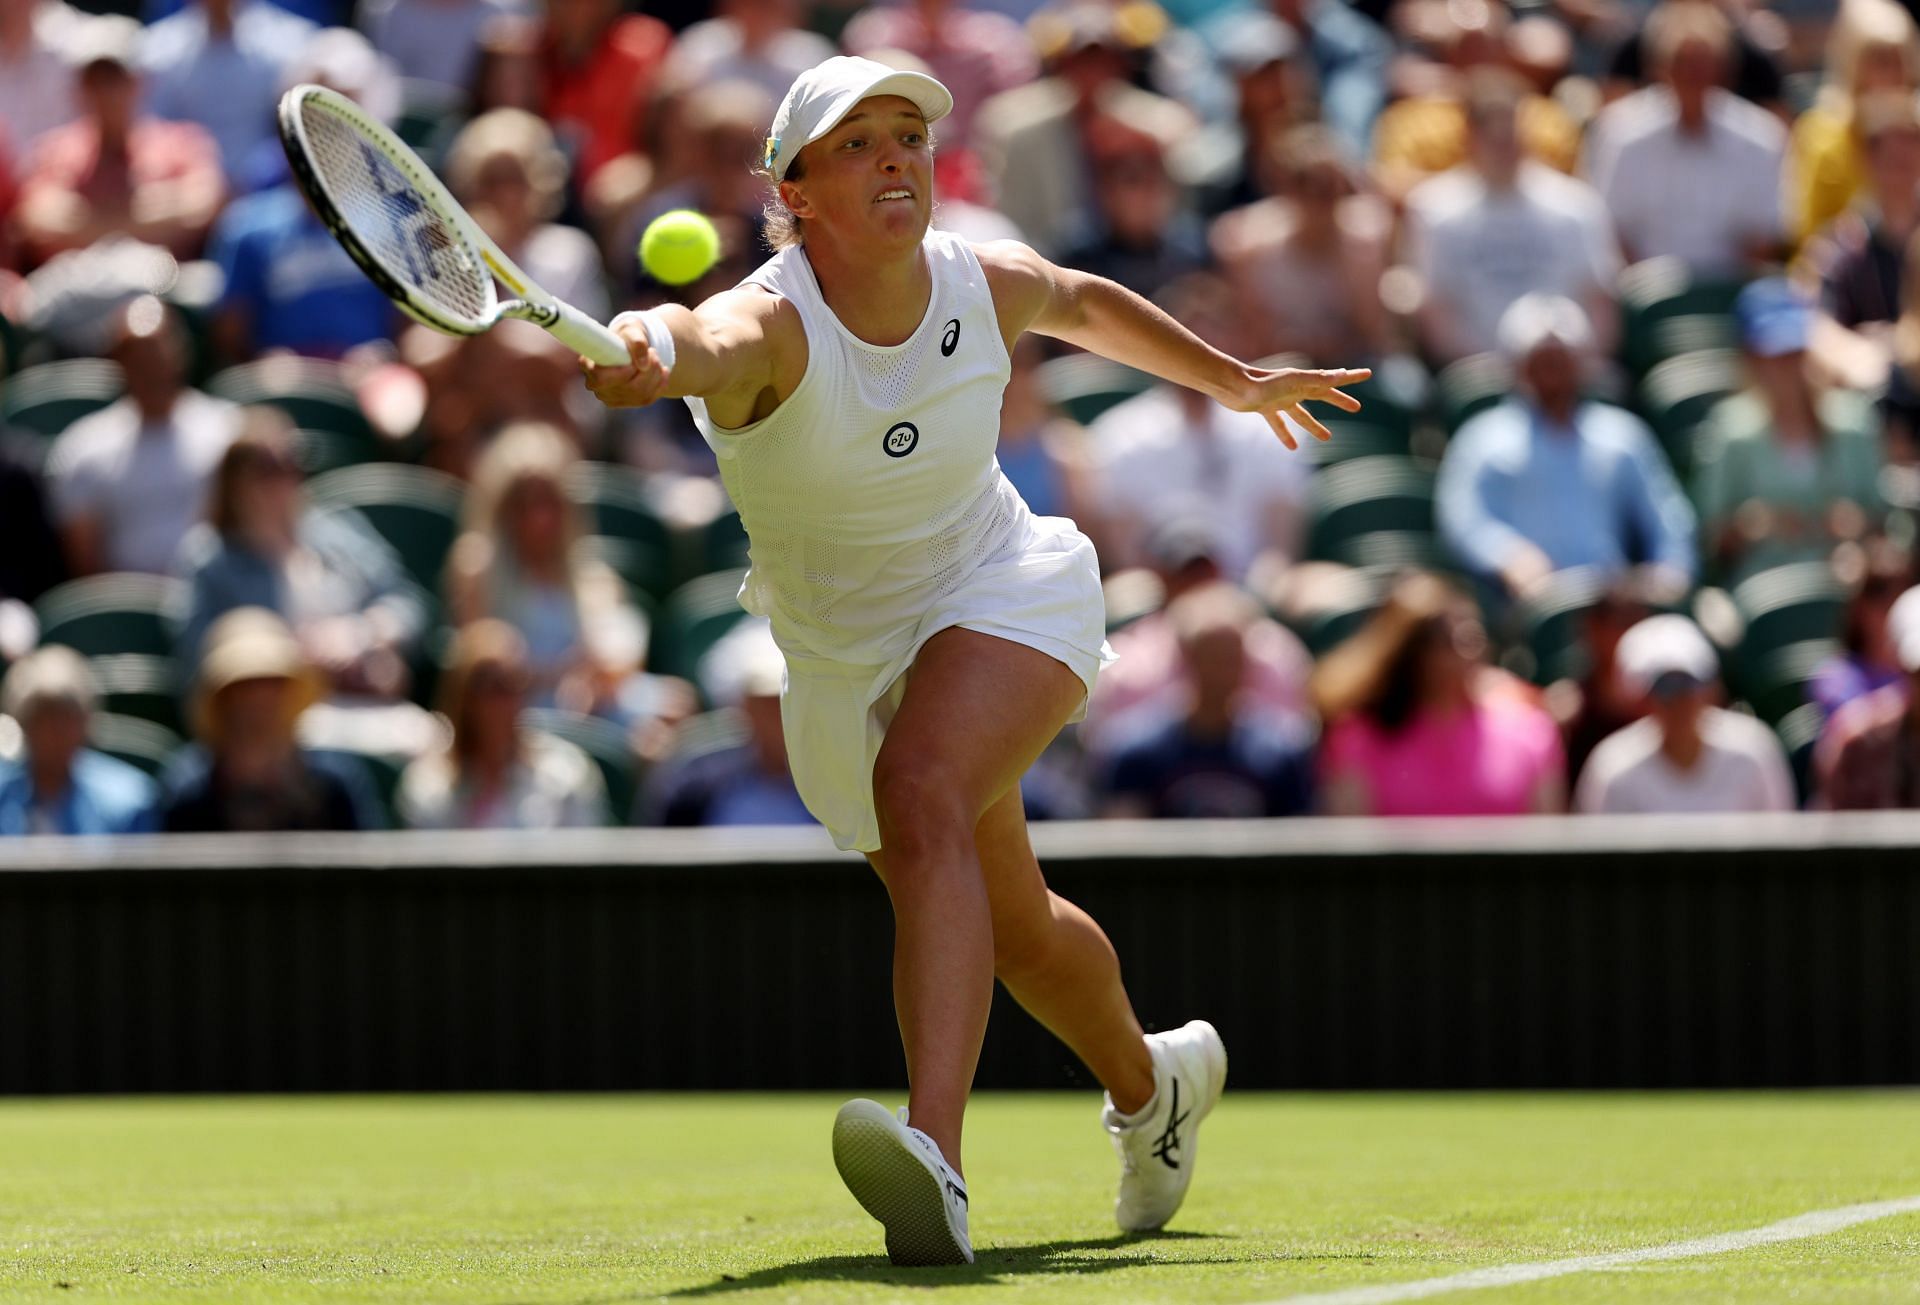 Iga Swiatek in action at the 2022 Wimbledon Championships.